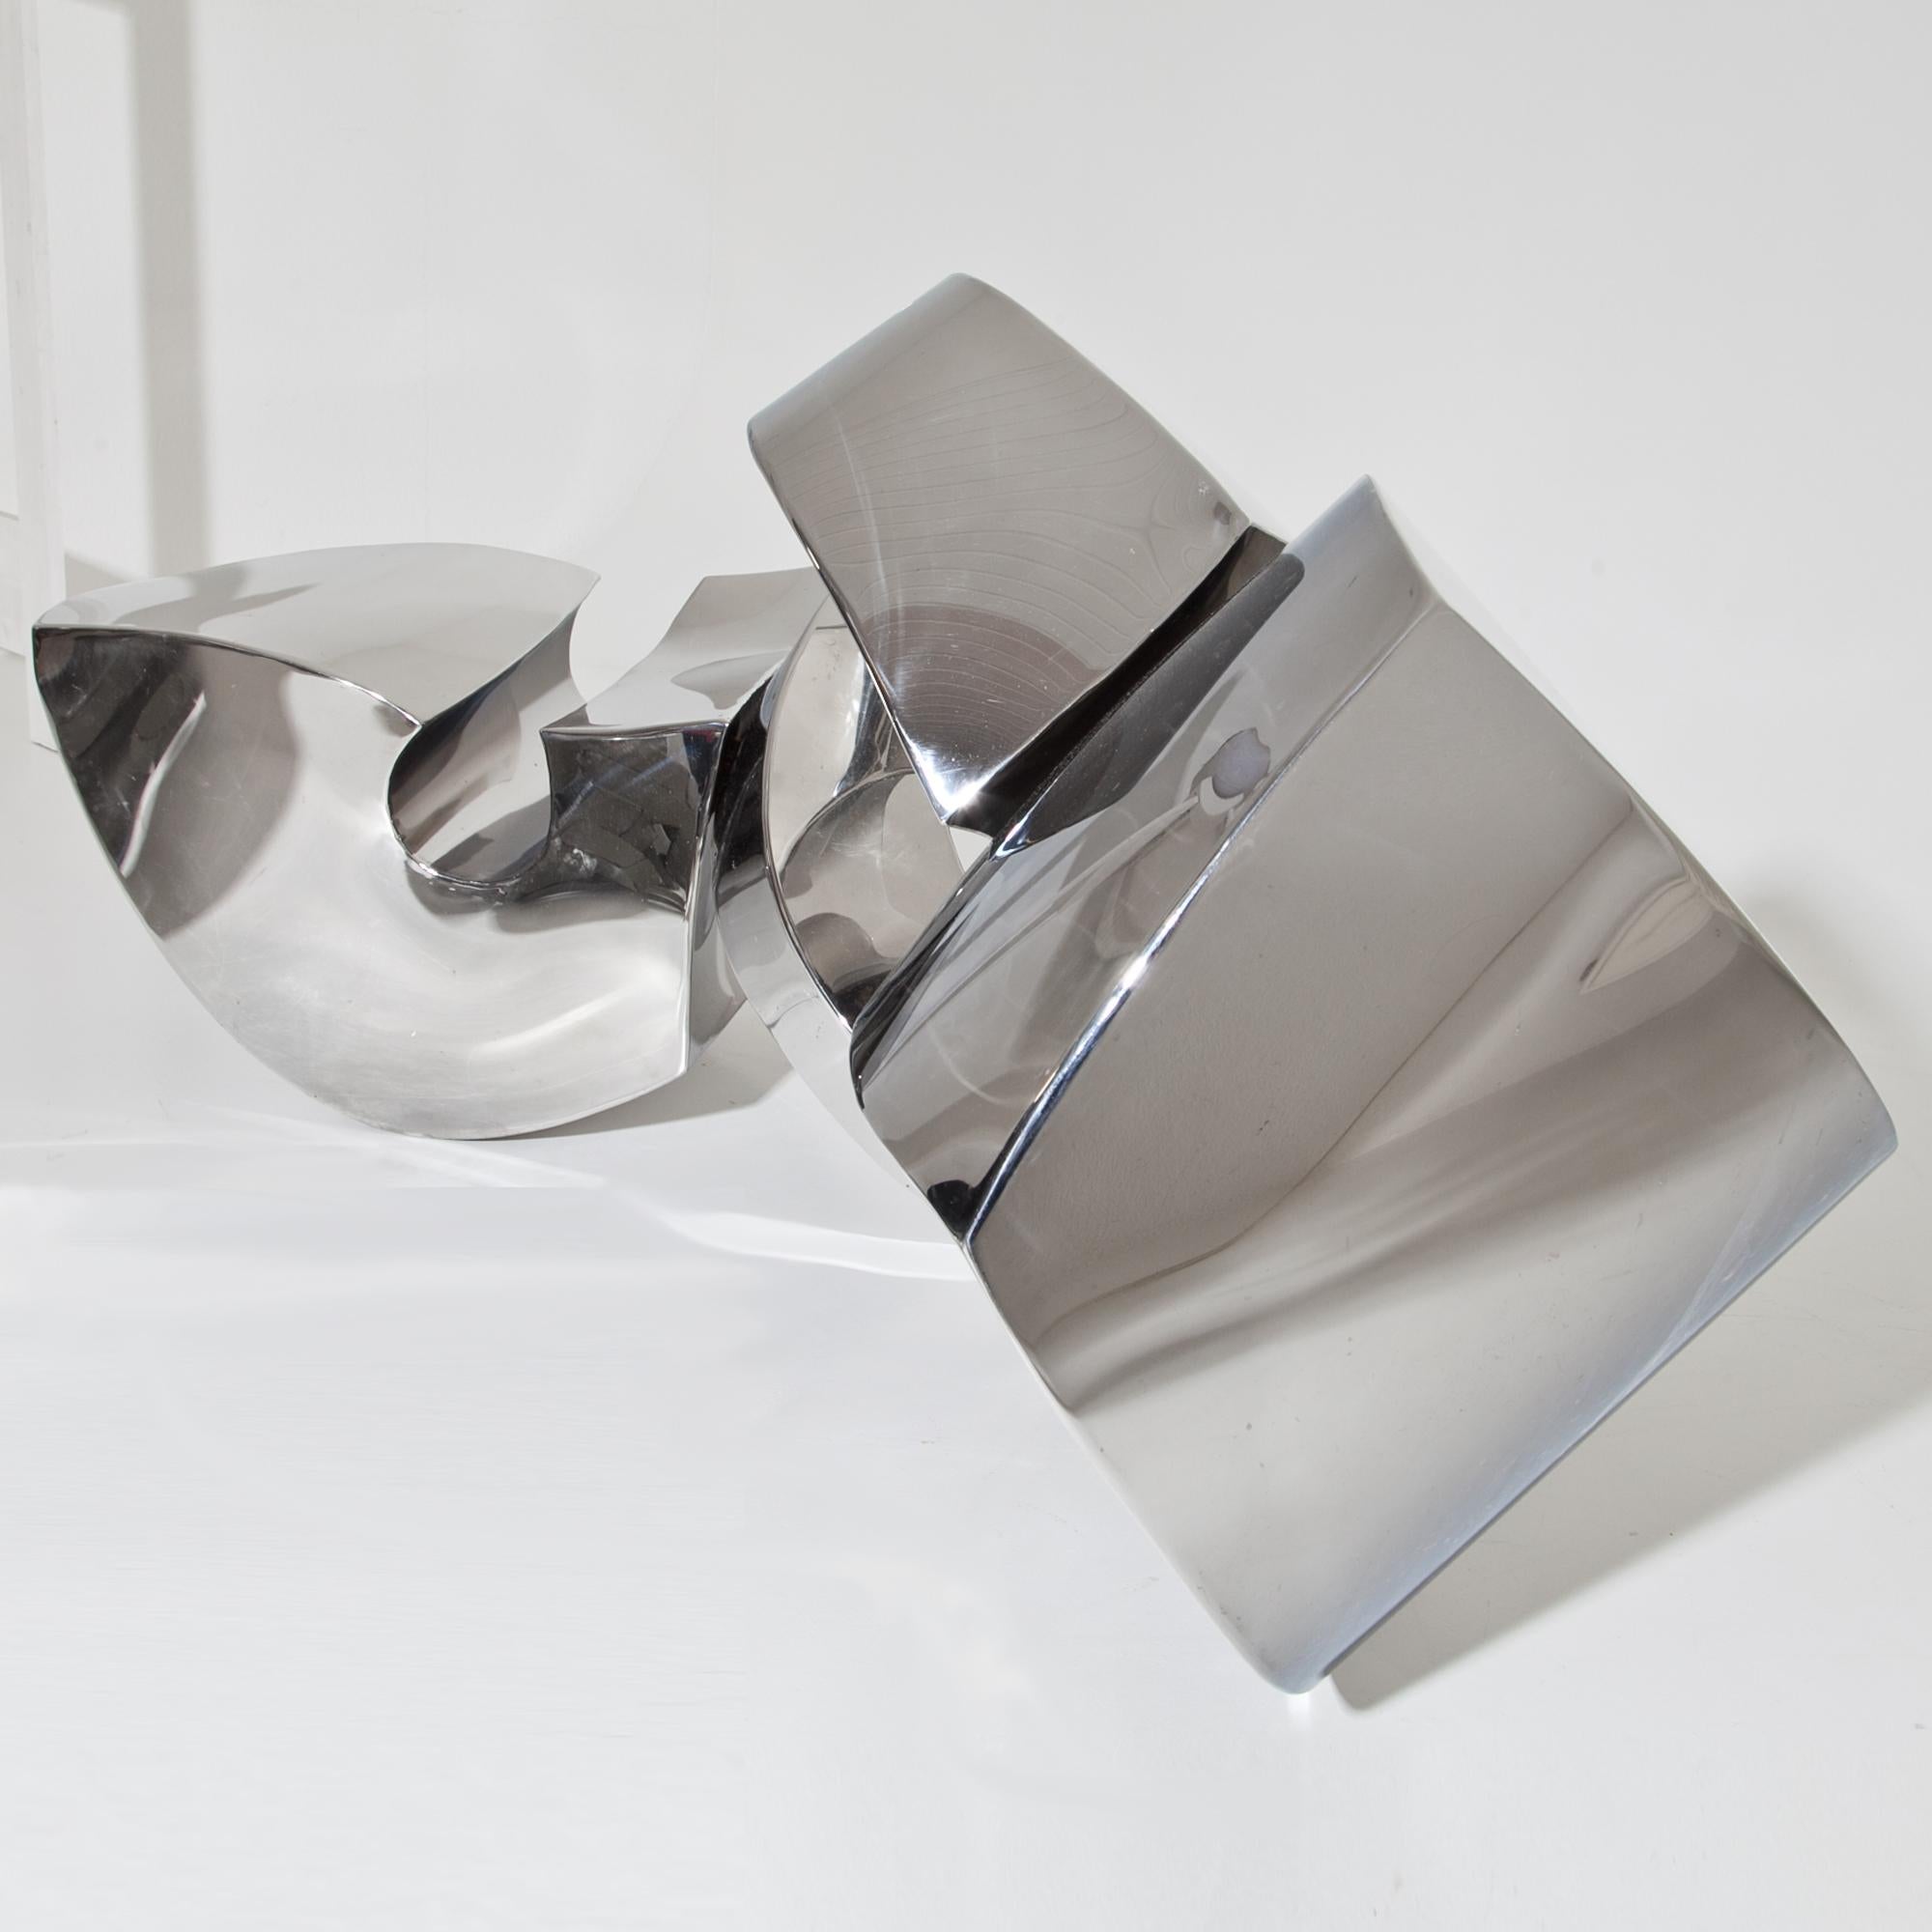 REFLEKTOR, Jörg Bach, 2013, polished Stainless Steel, Abstract Sculpture, Germany For Sale 5